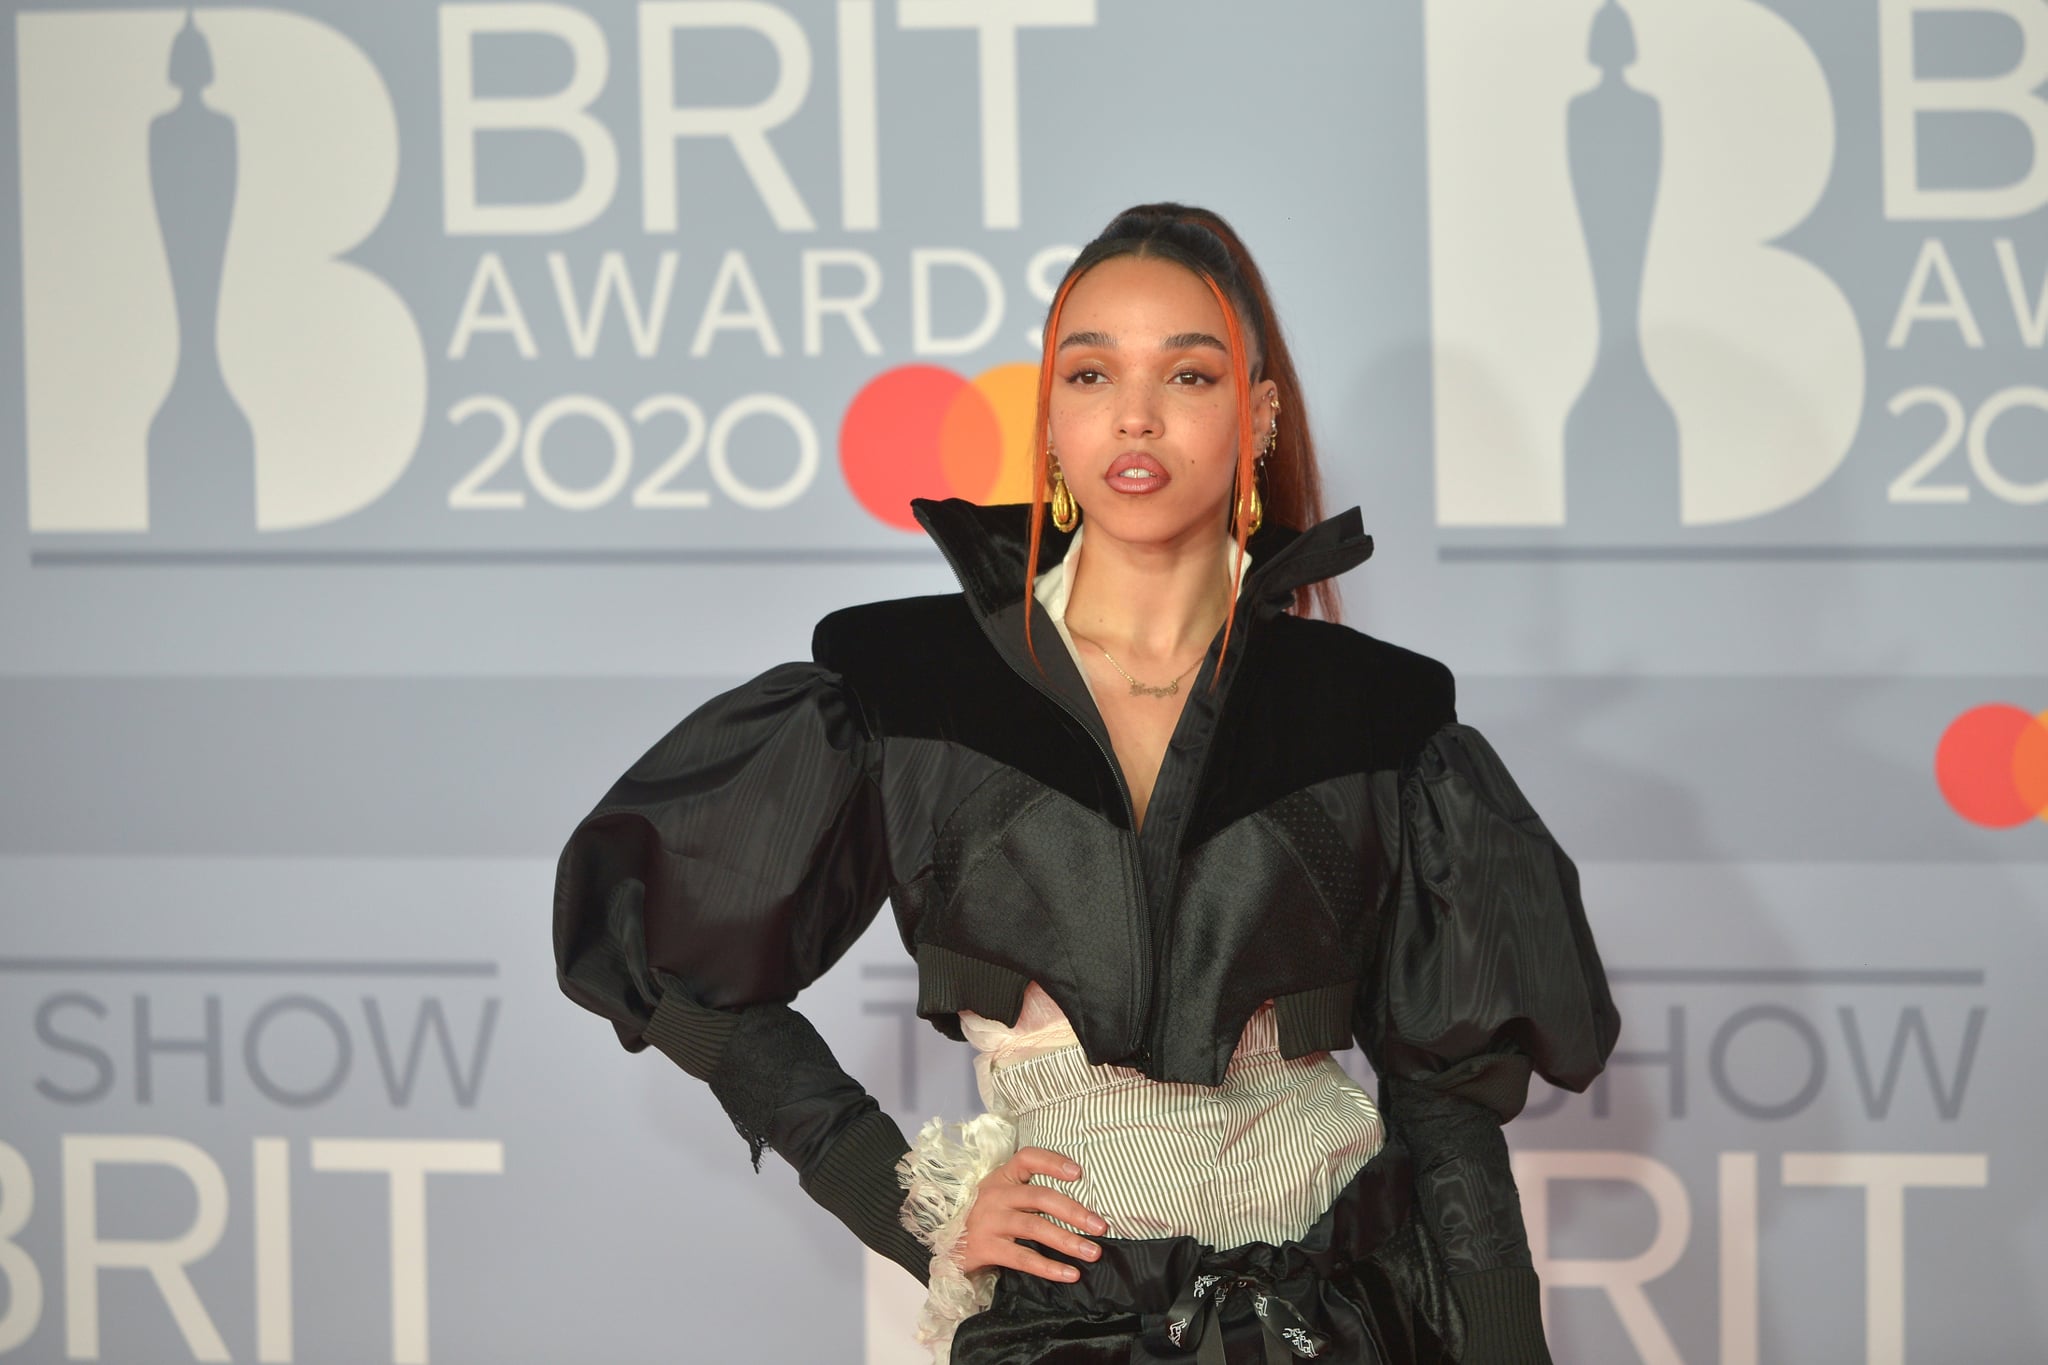 LONDON, ENGLAND - FEBRUARY 18: (EDITORIAL USE ONLY)  FKA Twigs attends The BRIT Awards 2020 at The O2 Arena on February 18, 2020 in London, England. (Photo by Jim Dyson/Redferns)